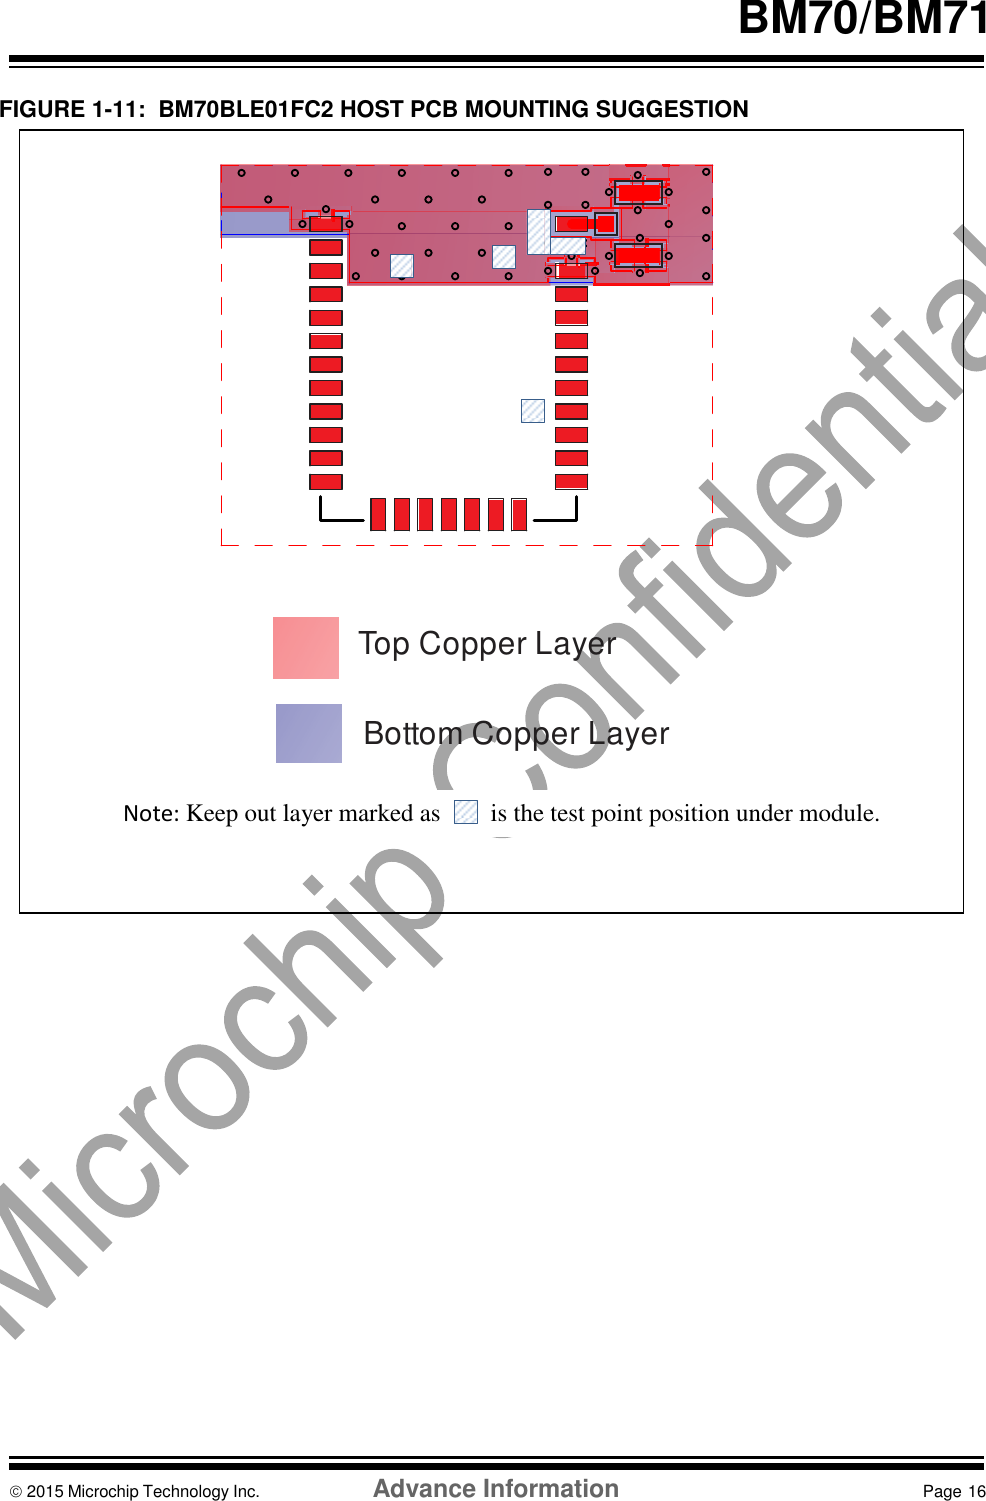    BM70/BM71   FIGURE 1-11:  BM70BLE01FC2 HOST PCB MOUNTING SUGGESTION  Top Copper LayerBottom Copper Layer                       2015 Microchip Technology Inc.  Advance Information  Page 16    Note: Keep out layer marked as        is the test point position under module. 